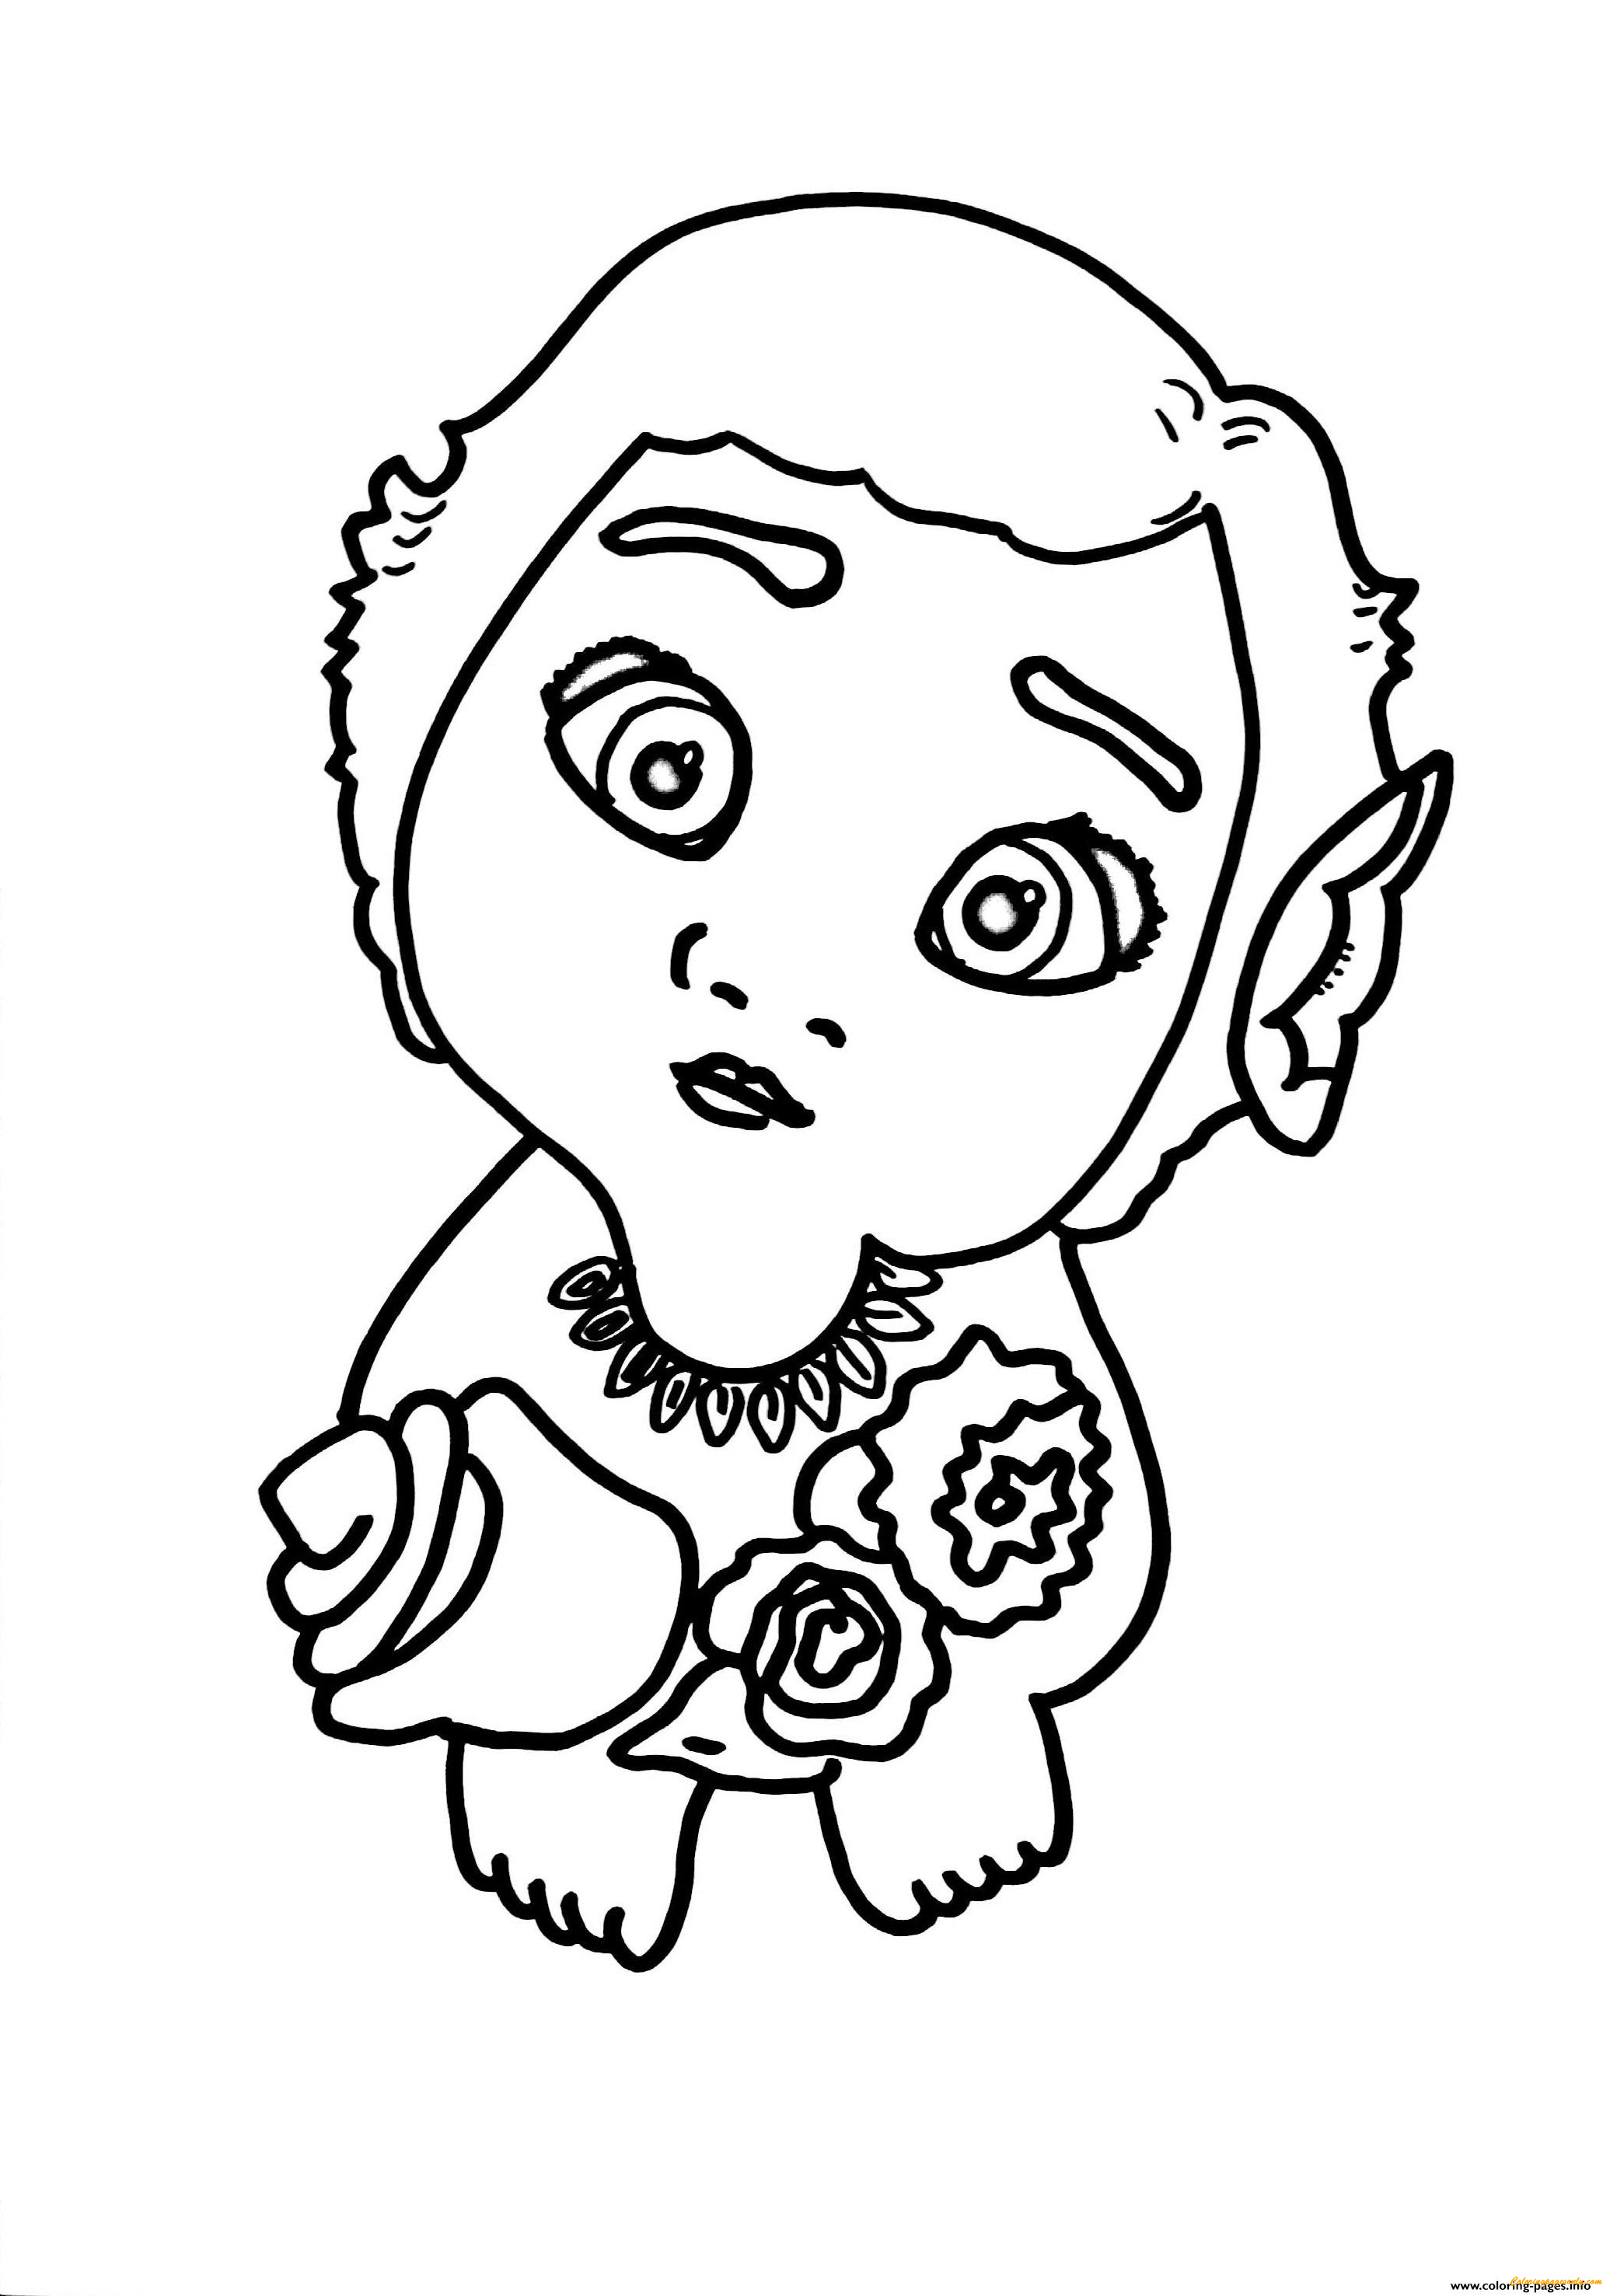 Baby Moana With Flowers Coloring Pages Cartoons Coloring Pages Coloring Pages For Kids And Adults